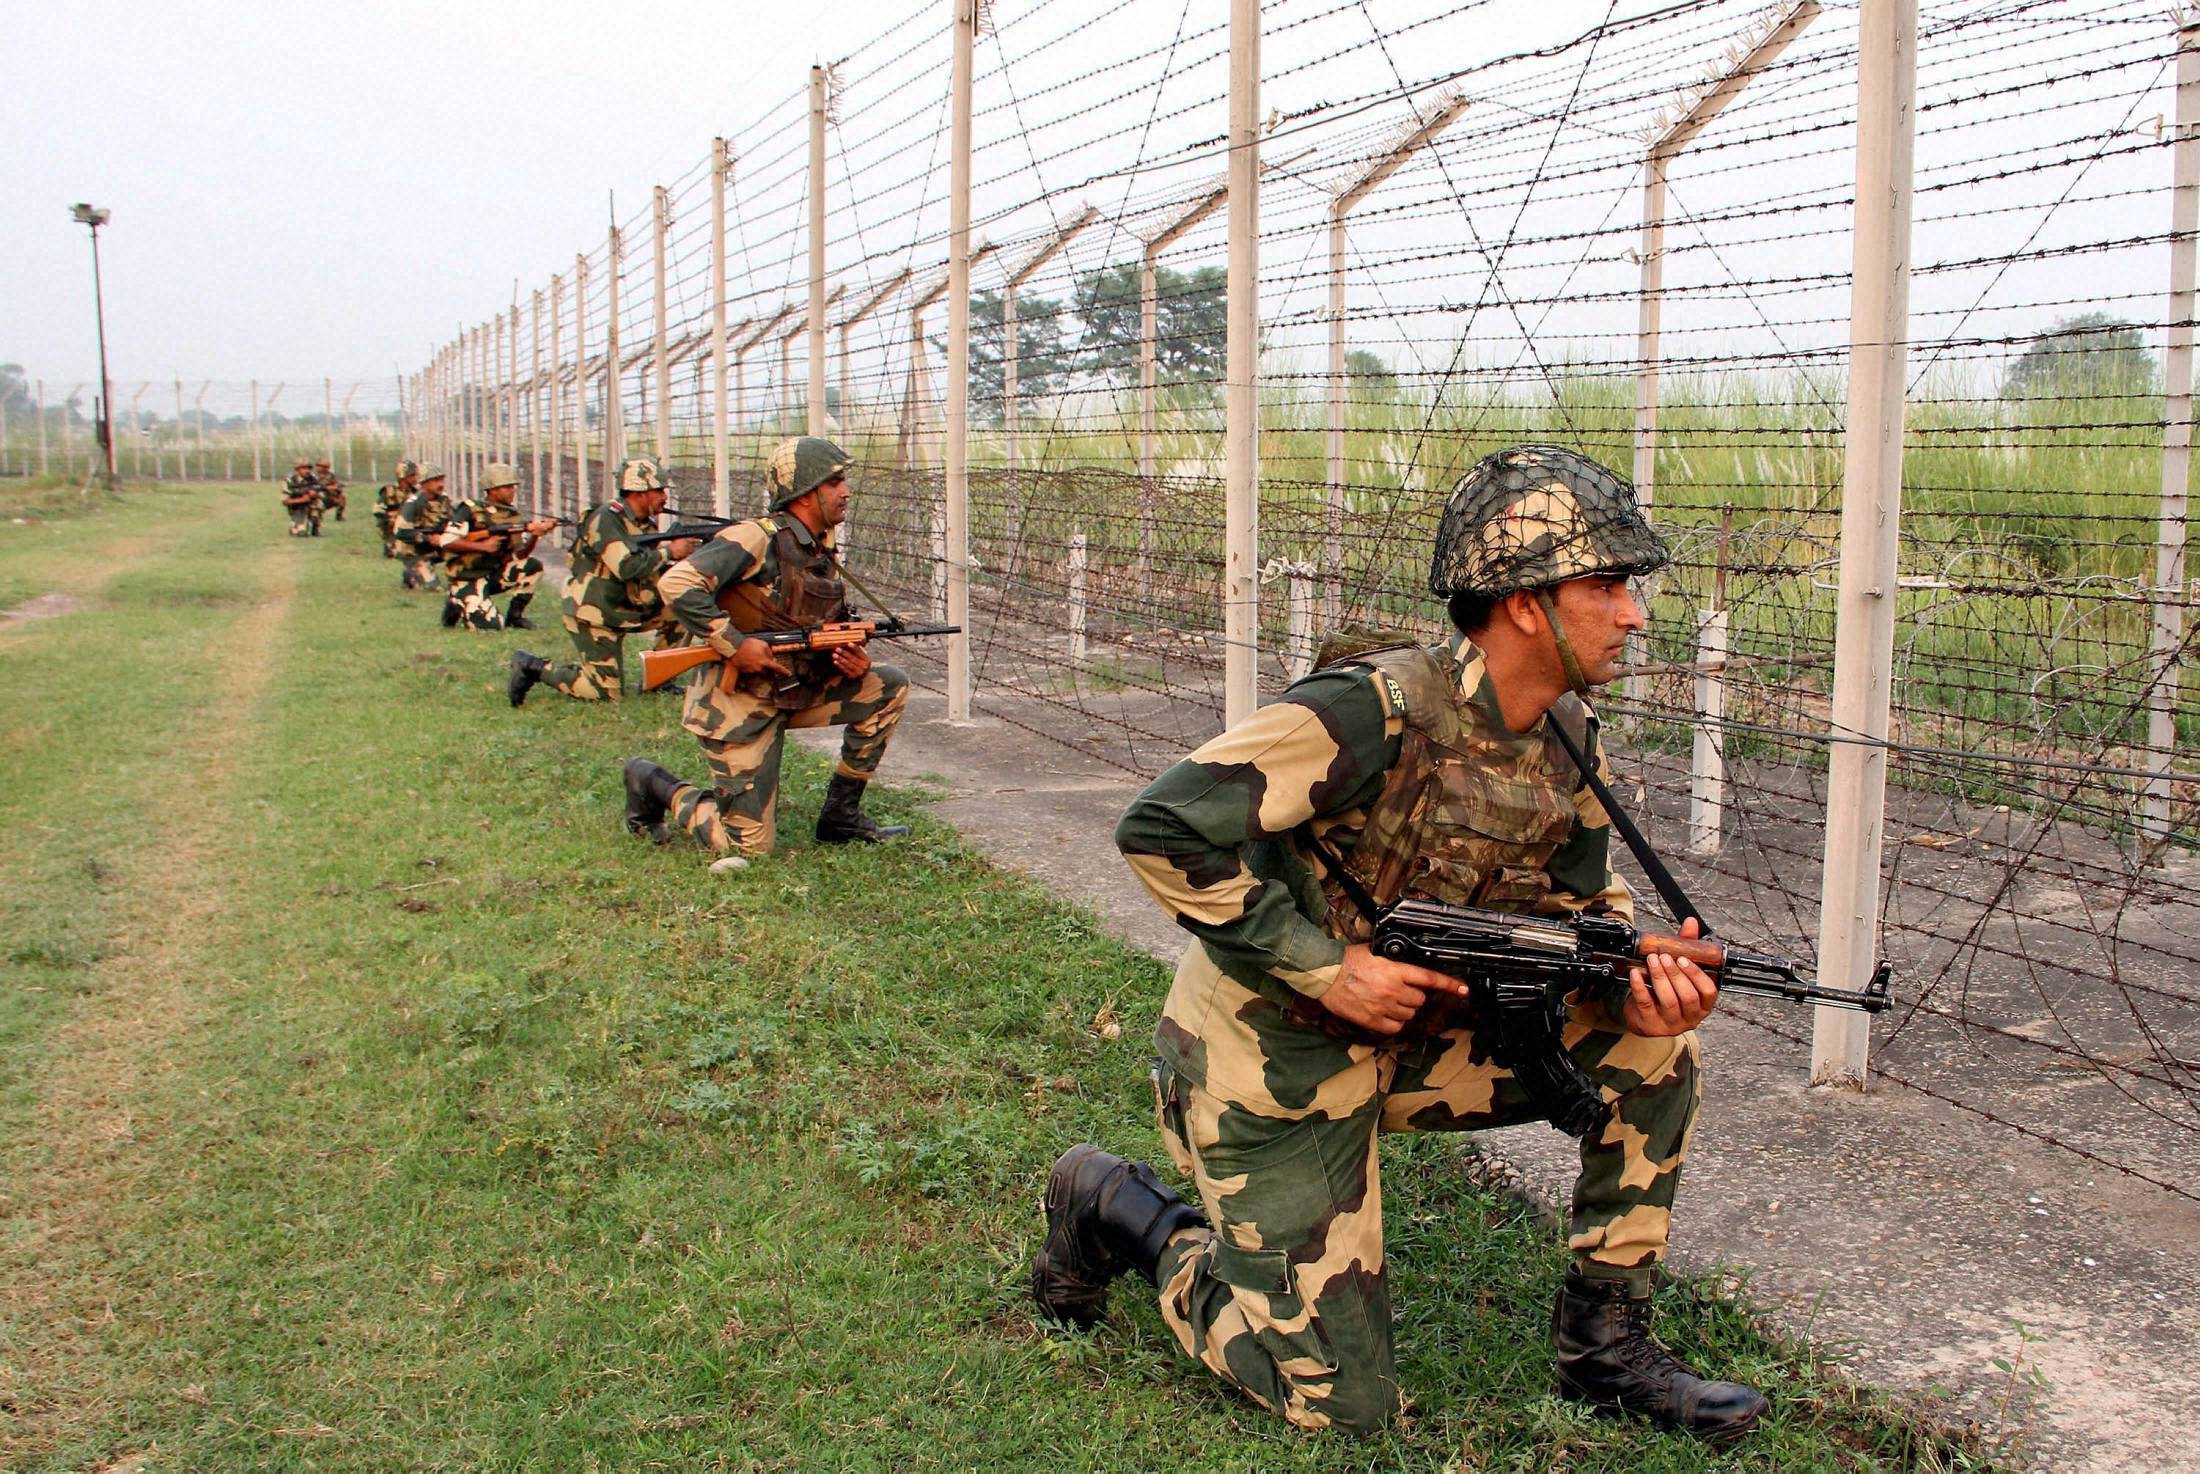 Infiltration bid foiled, 2 terrorists killed in Poonch